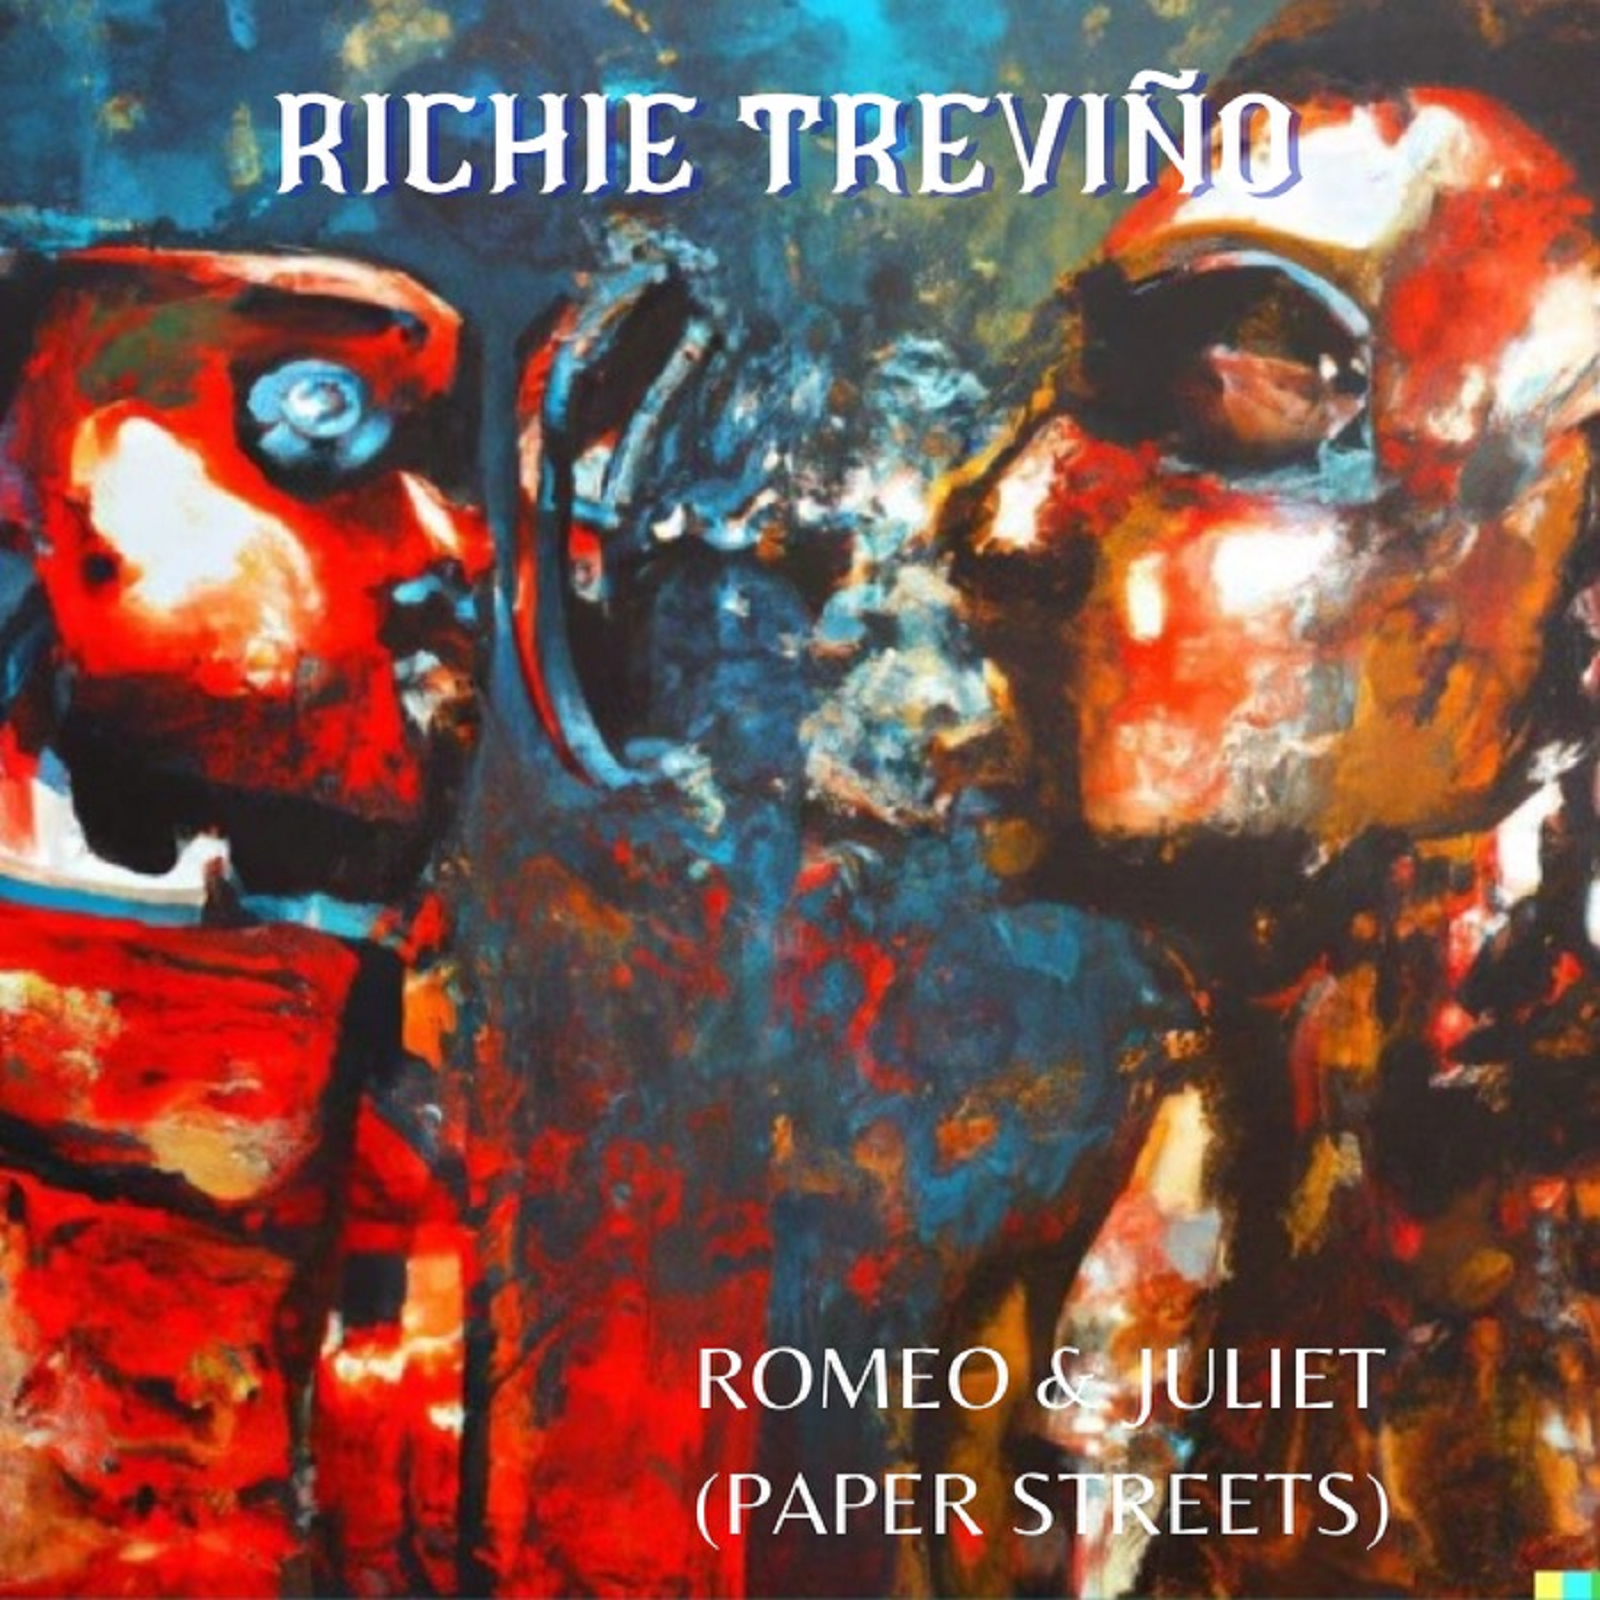 POP ROCK PREMIERE: ‘Romeo and Juliet ( Paper Streets )’ is the new single from ‘Richie Trevino’.